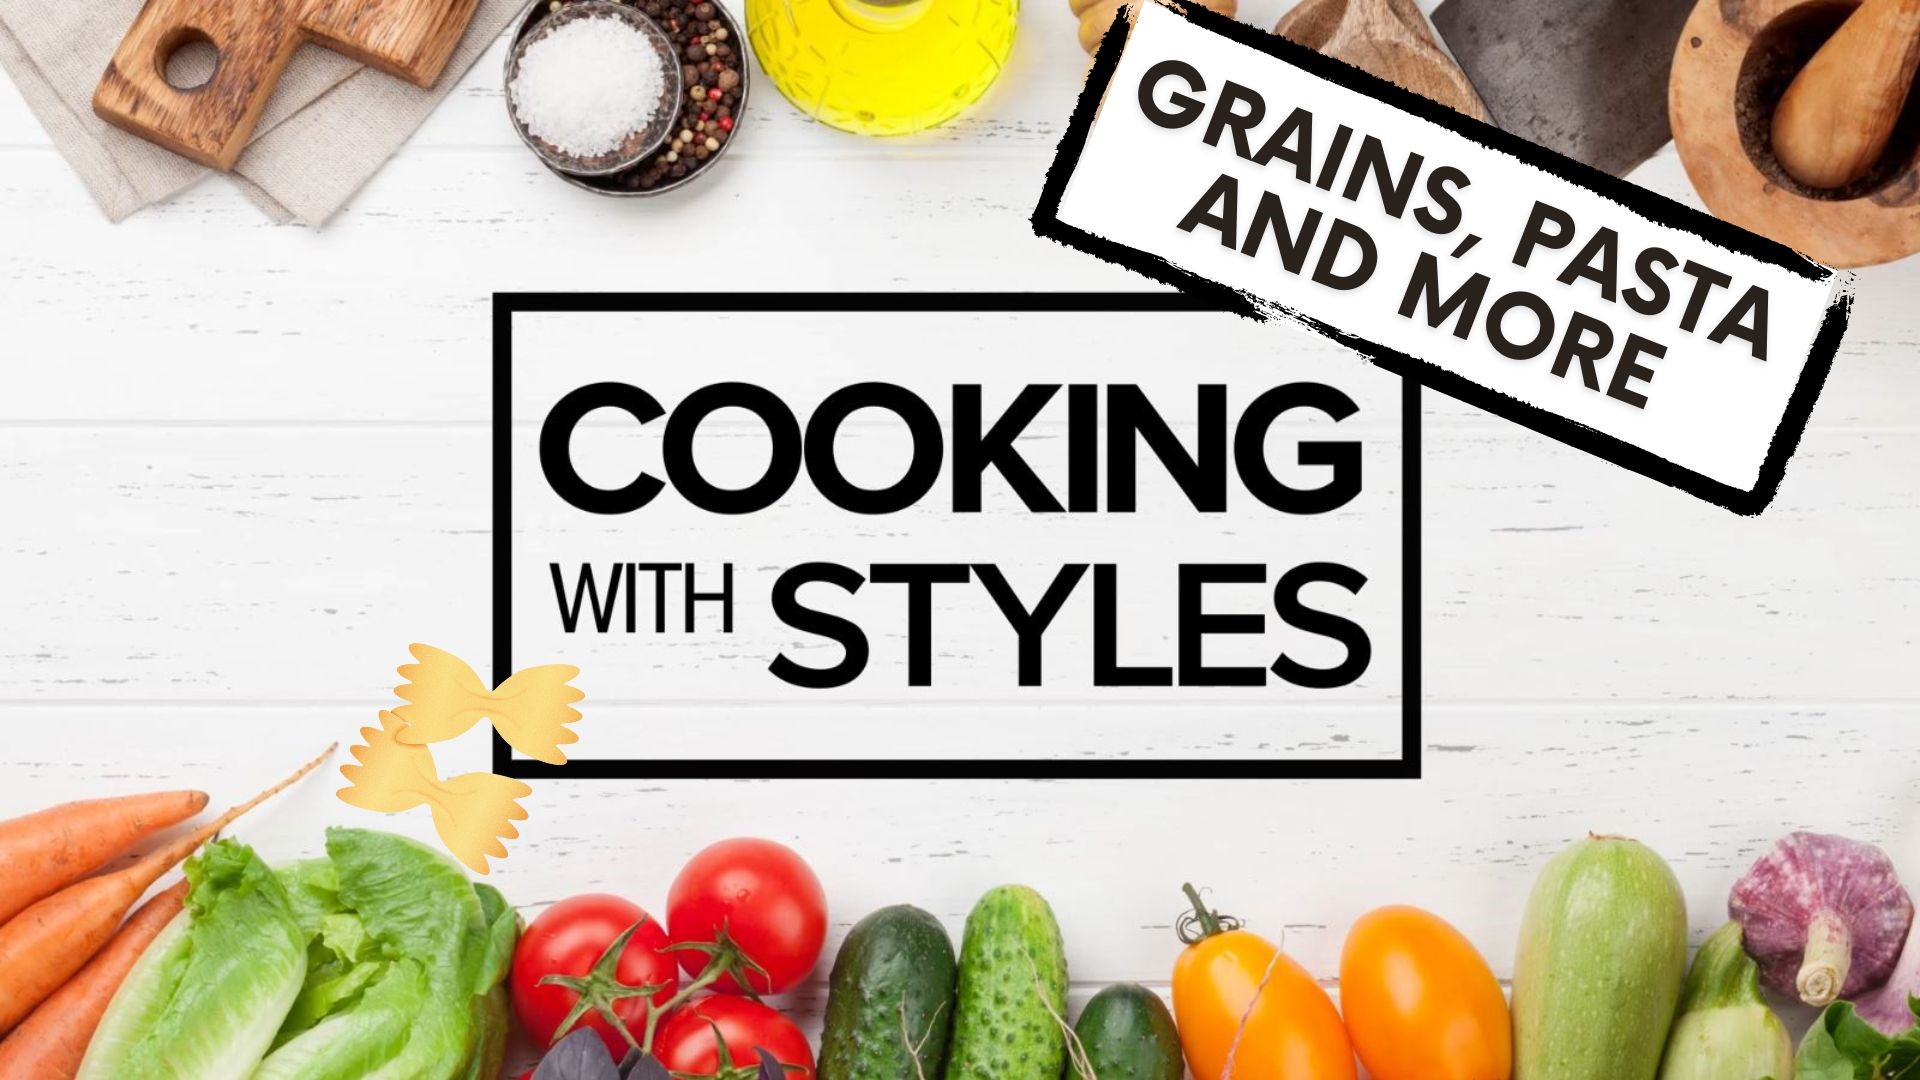 KFMB's Shawn Styles shares some recipes to help you make your own couscous, gnocchi, and more.